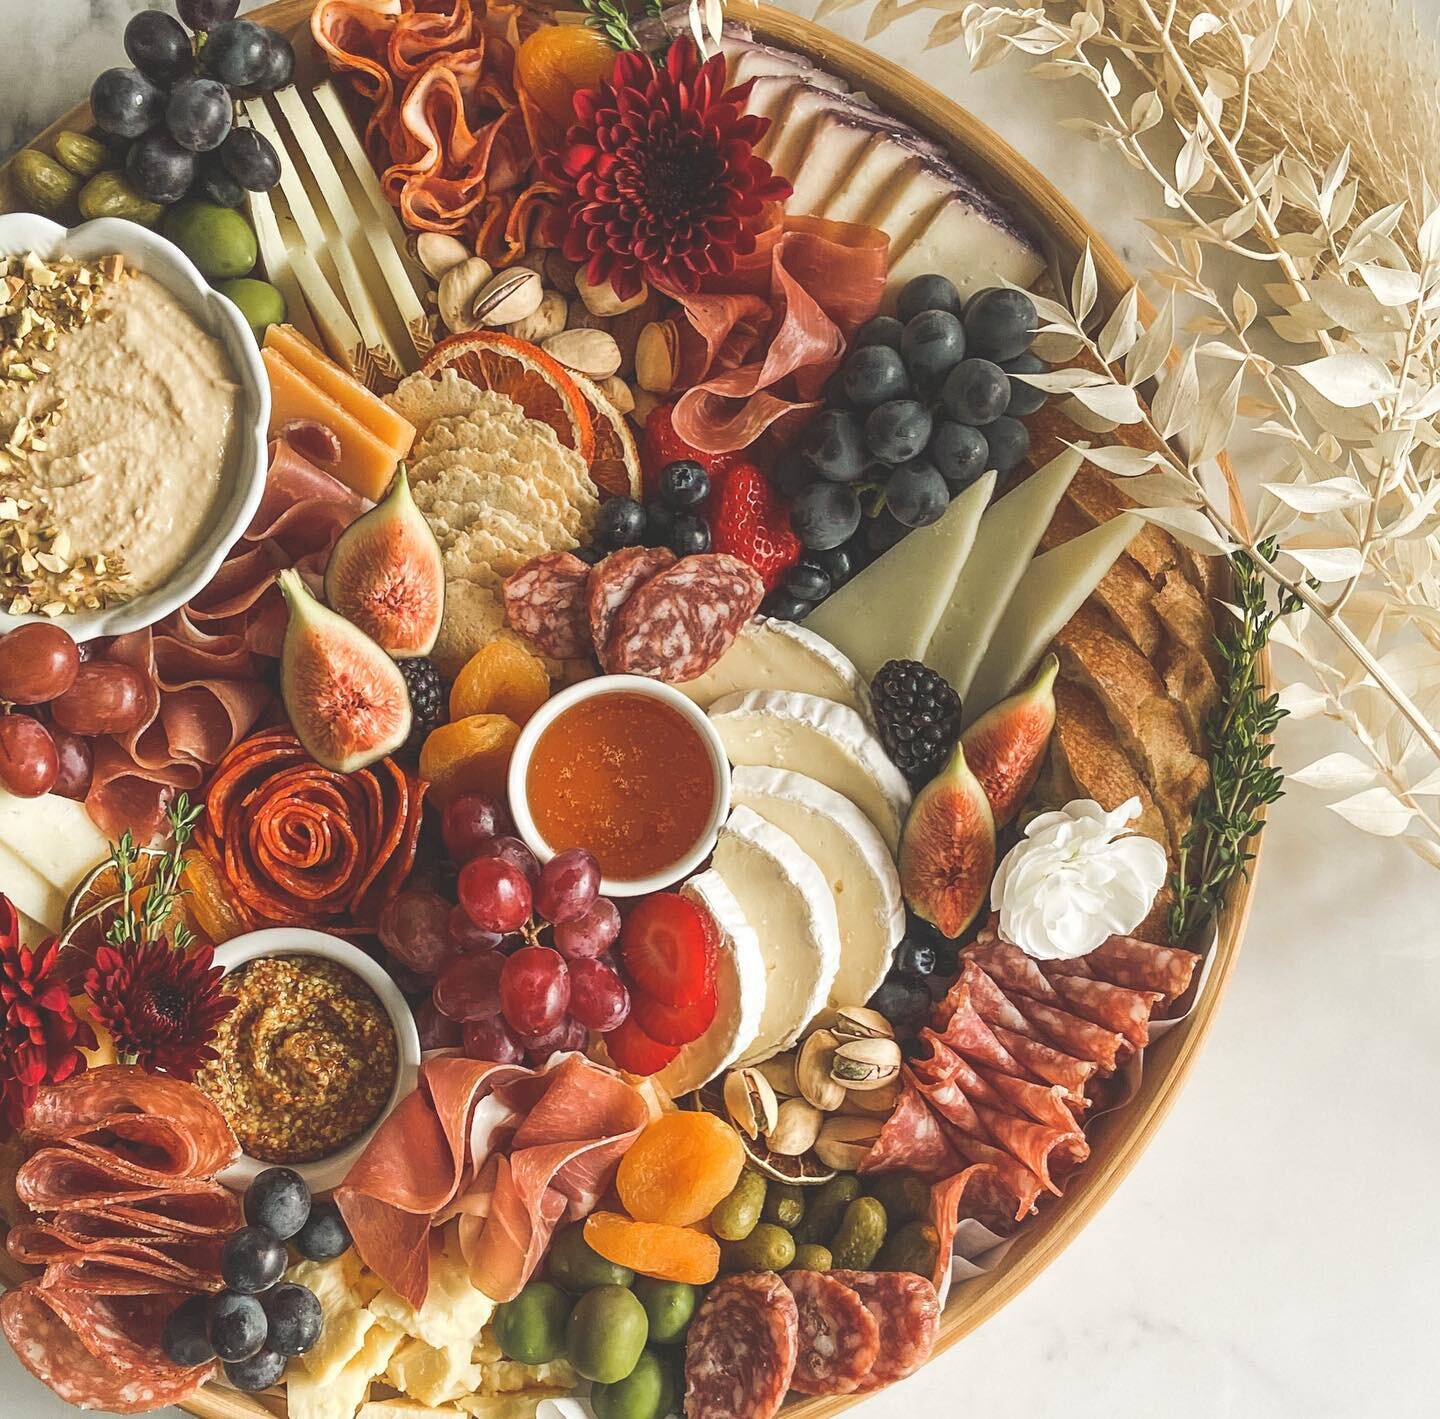 Fall is in the air cheese-lovers! Tis&rsquo; the season of crisp air, pumpkin-filled everything and festive dinner parties with friends and family. Our limited edition Thanksgiving platter is now LIVE on our website. Our favourite fix-ins are the Bel